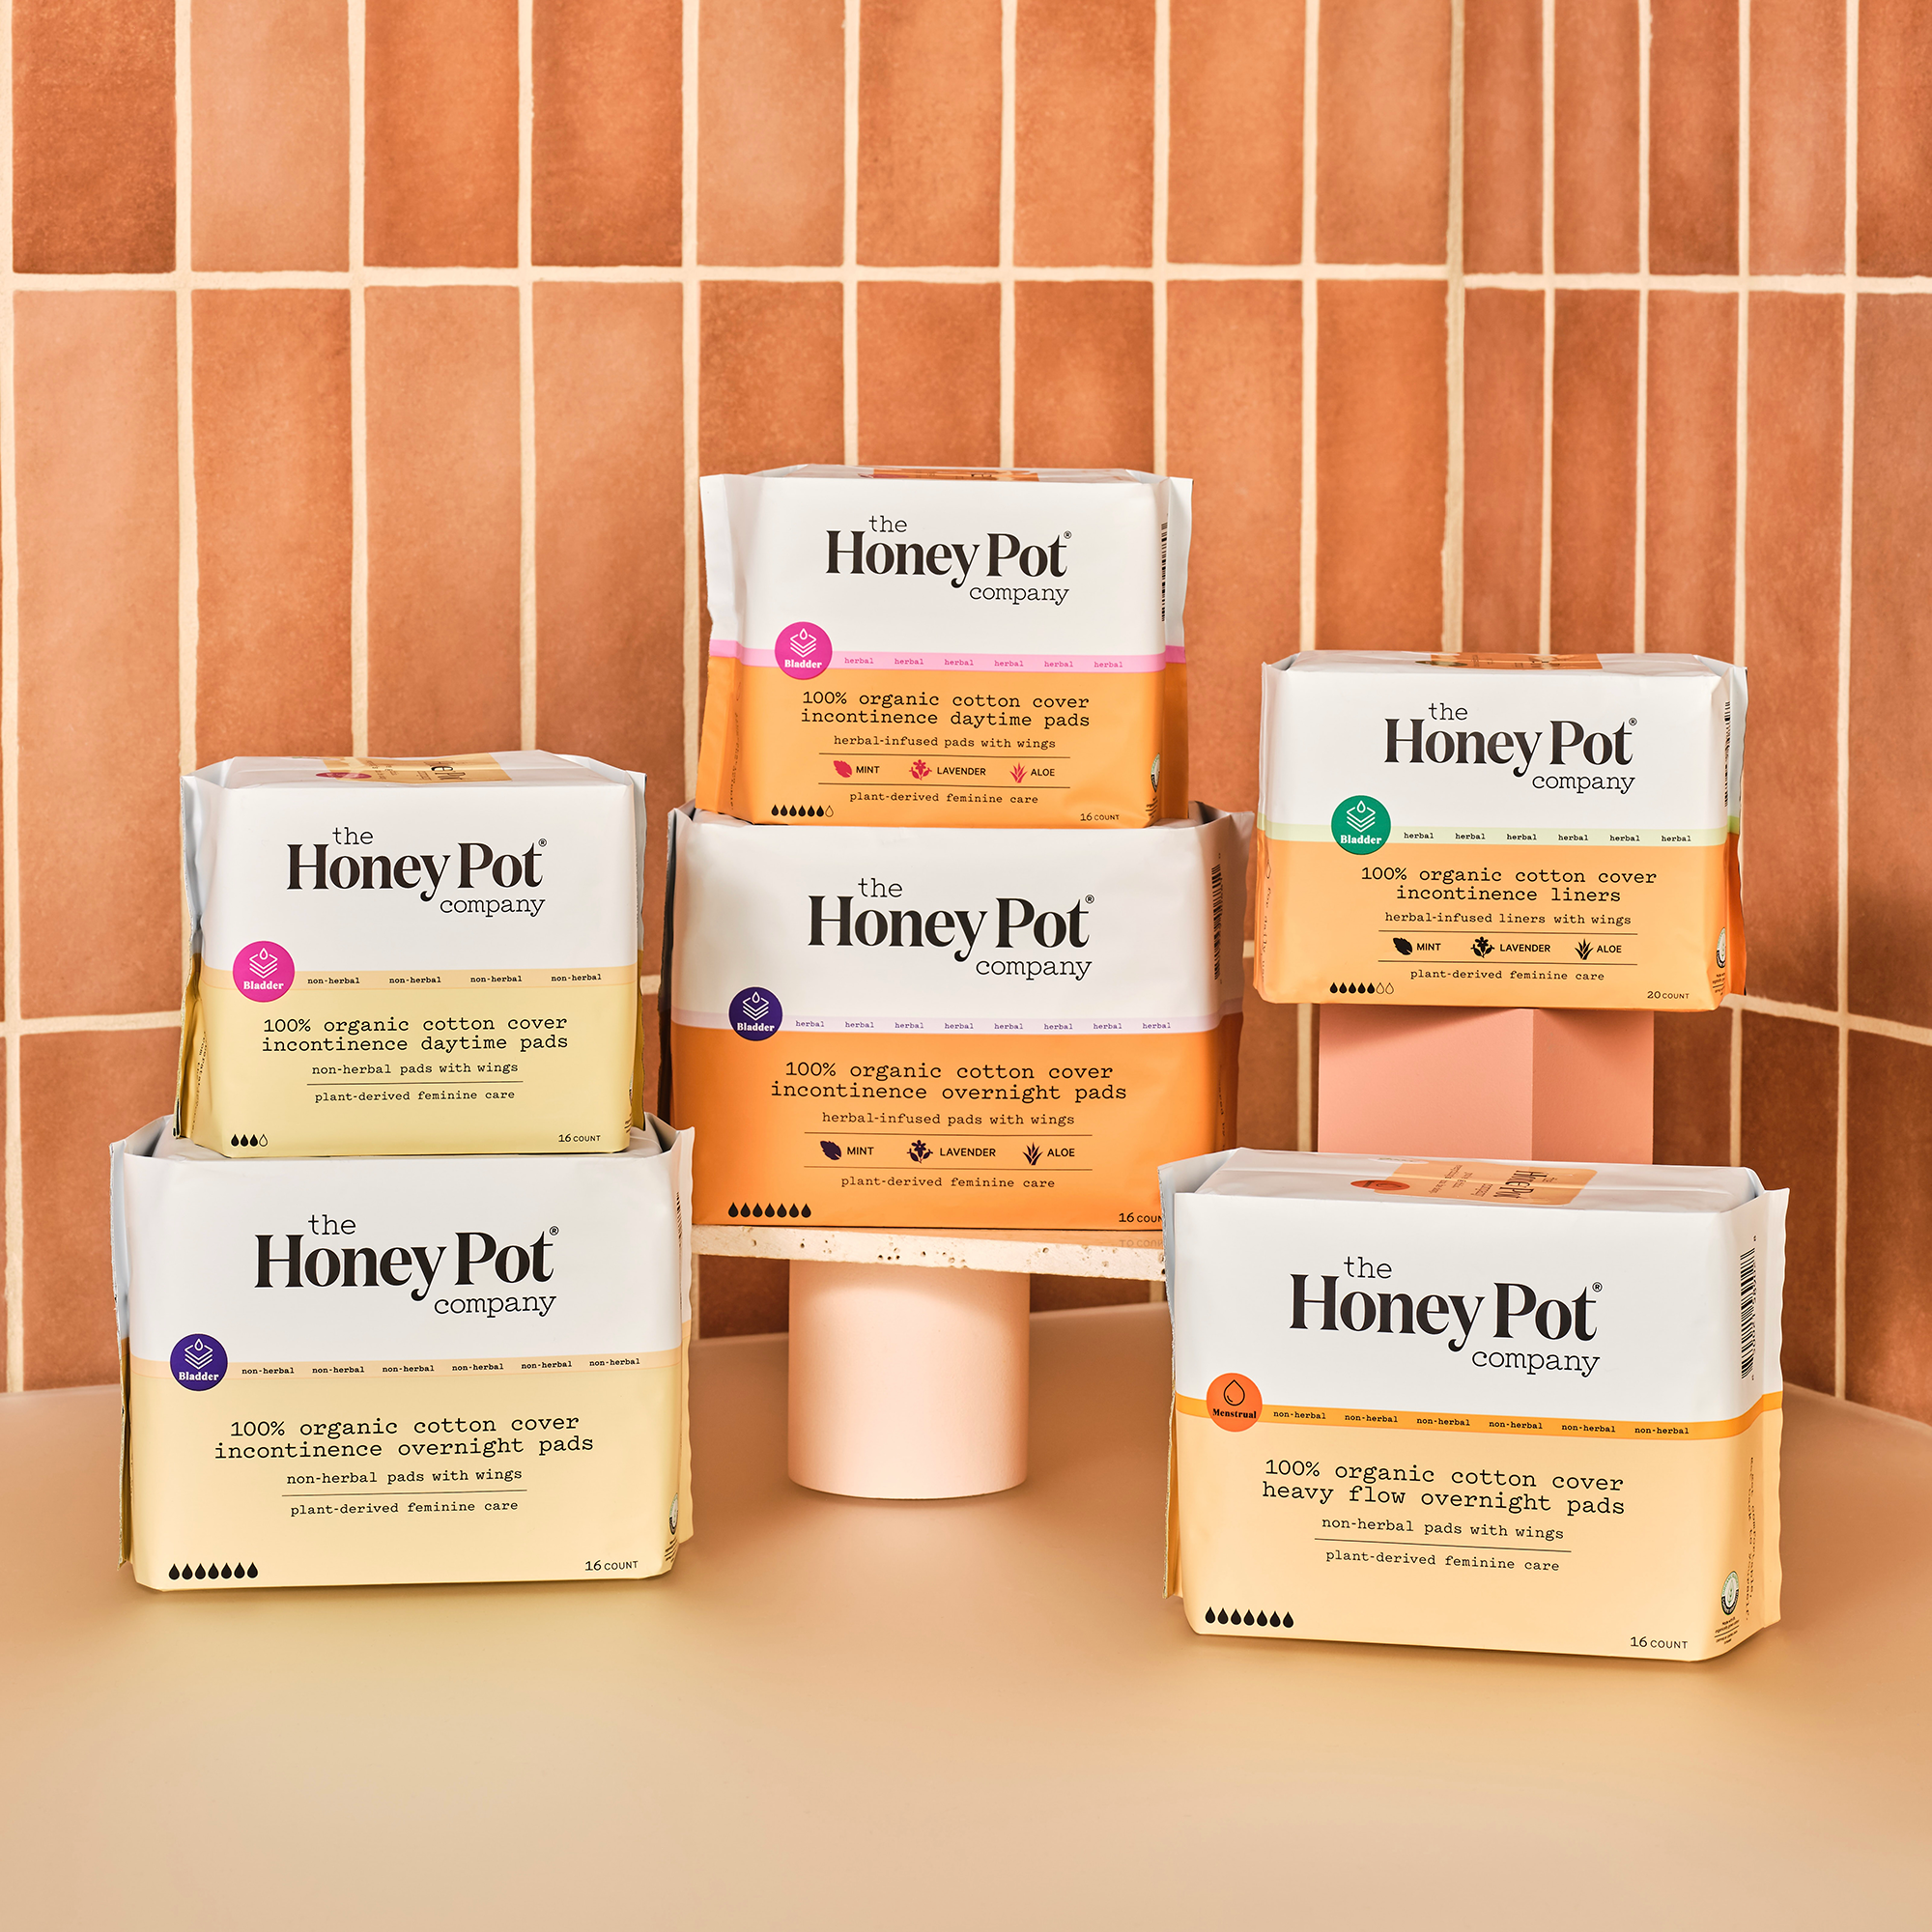 The Honey Pot Regular Herbal Pads with Wings